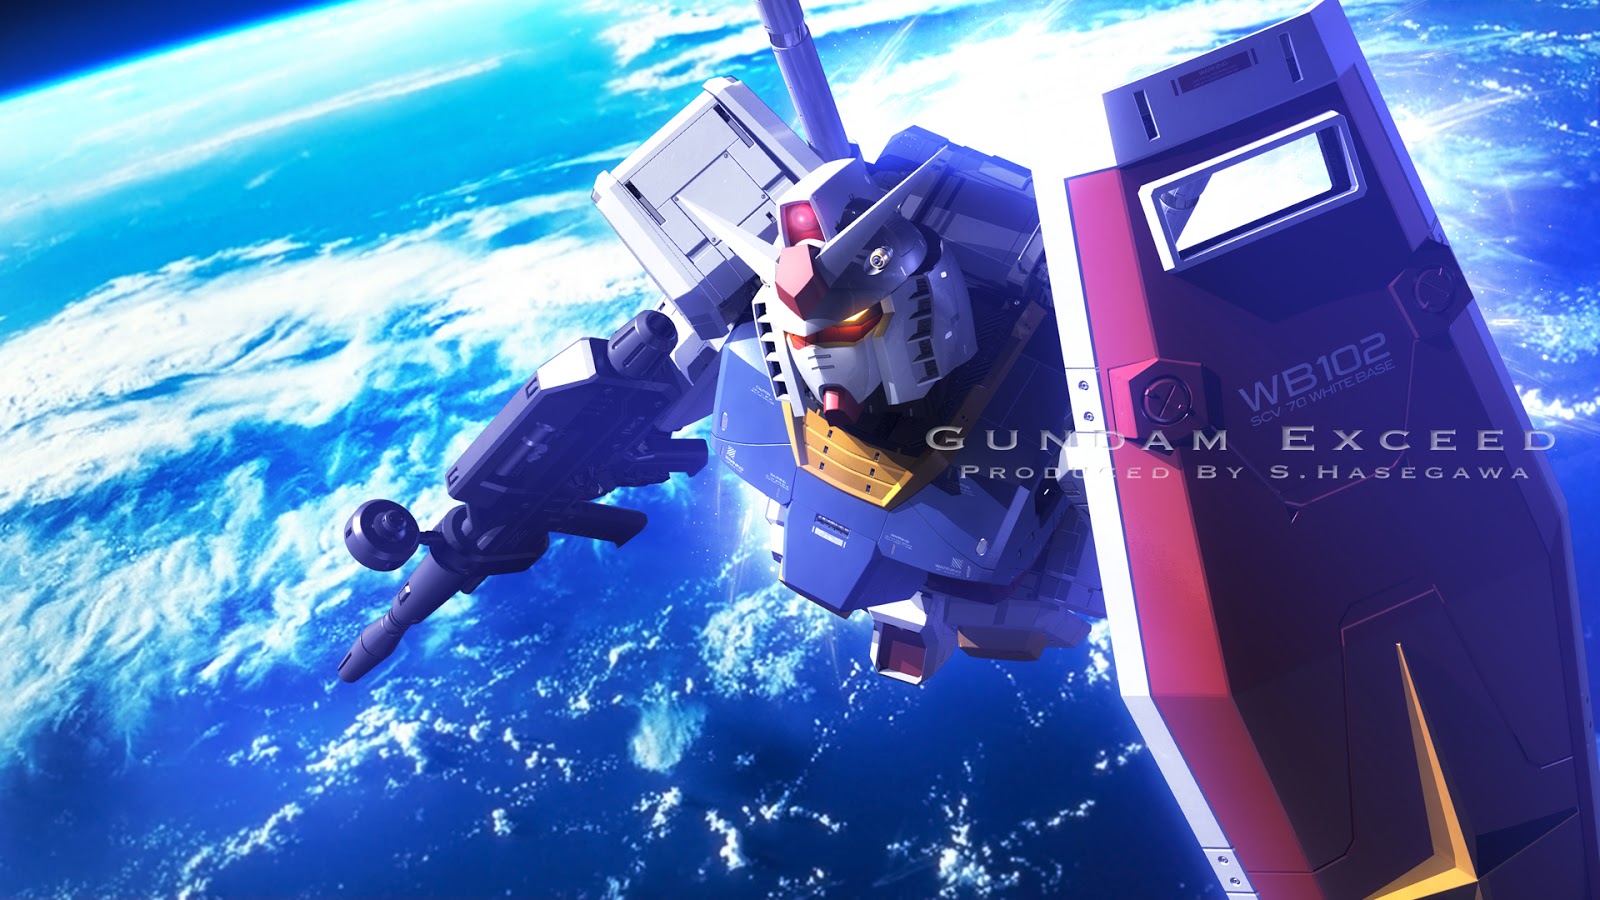 Gundam Exceed Wallpapers Image Gallery Gundam Kits Collection News And Reviews